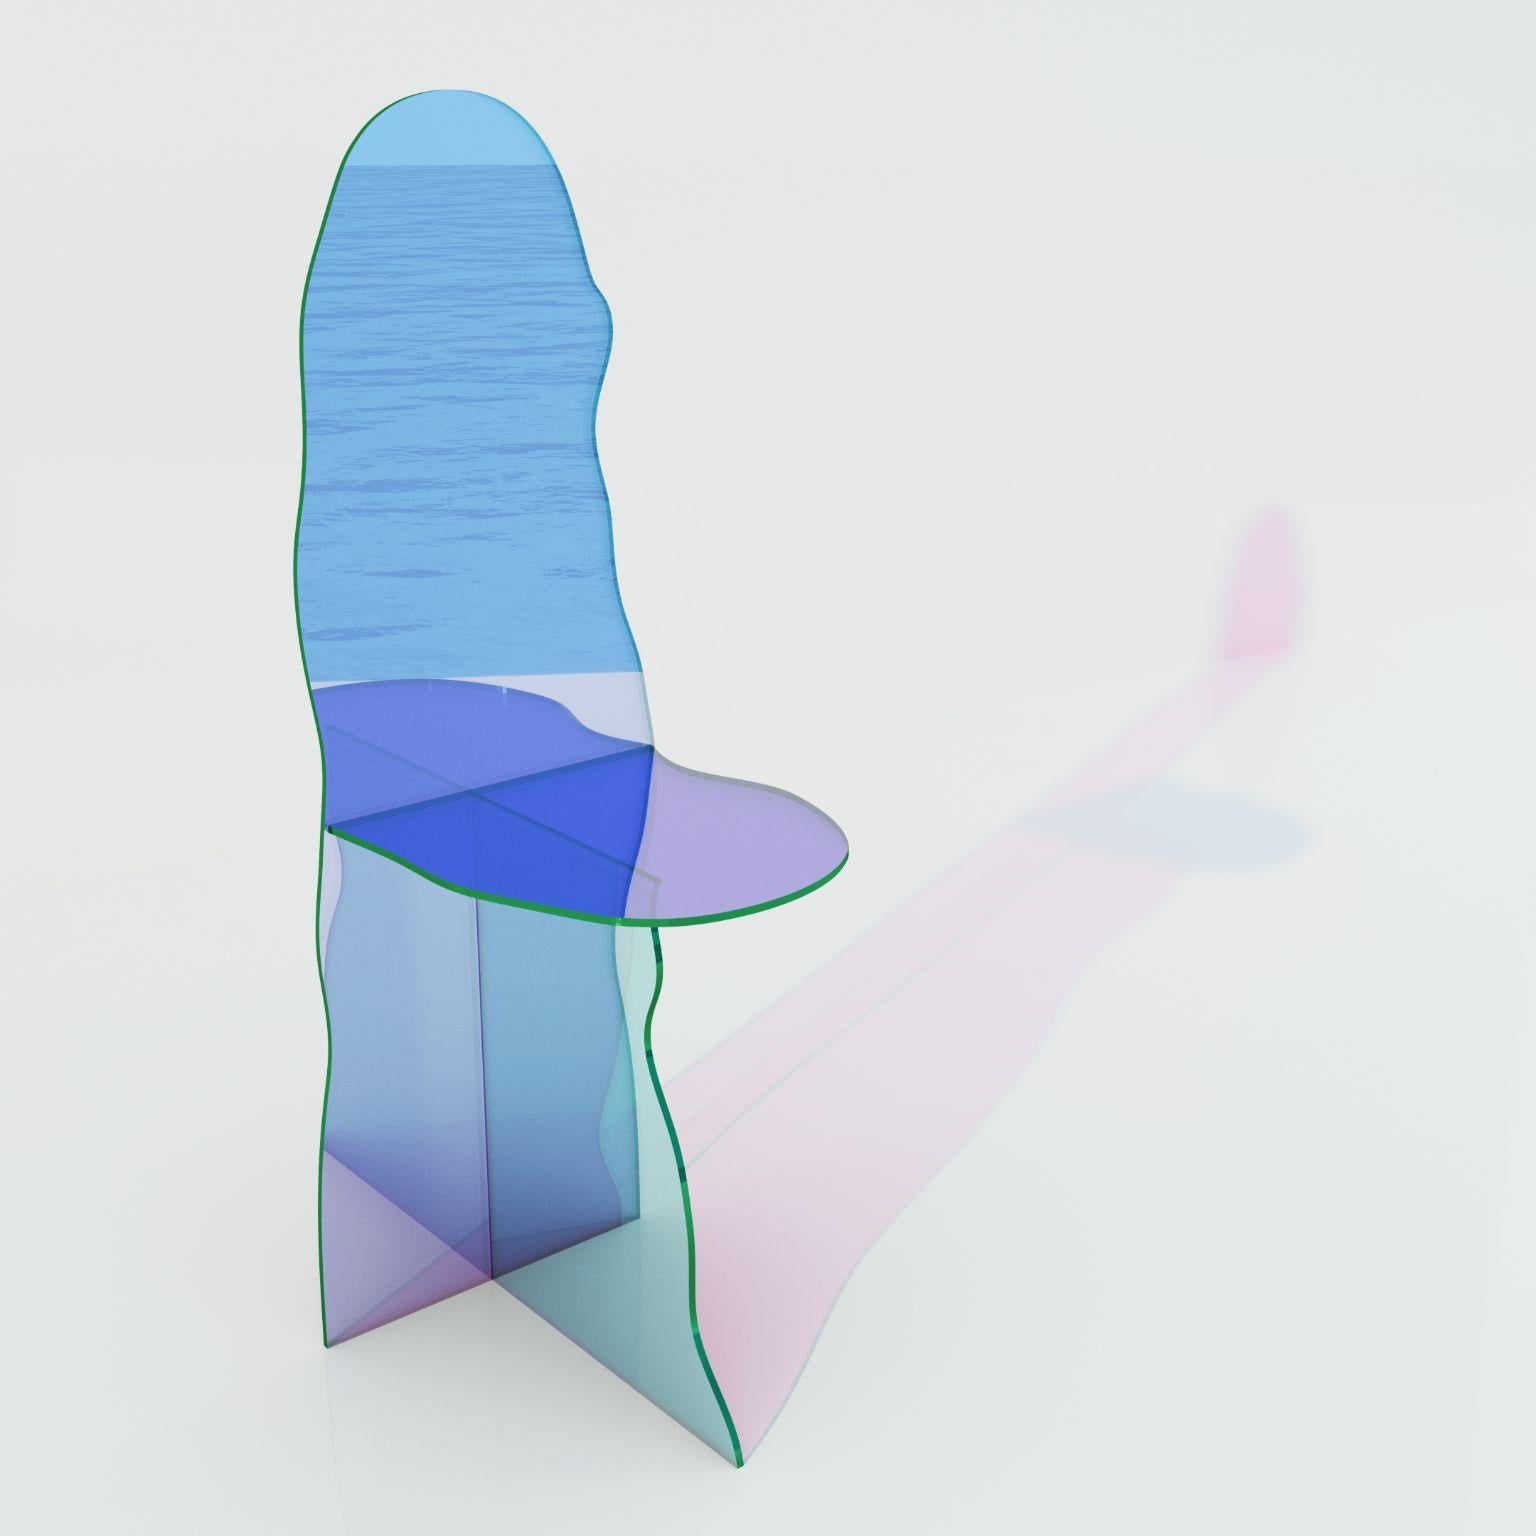 Isola chair by Brajak Vitberg
Dimensions: 43 x 55 x 120 cm
Materials: Dichroic glass

Bijelic and Brajak are two architects from Ljubljana, Slovenia.
They are striving to design craft elements and make them timeless through experimental